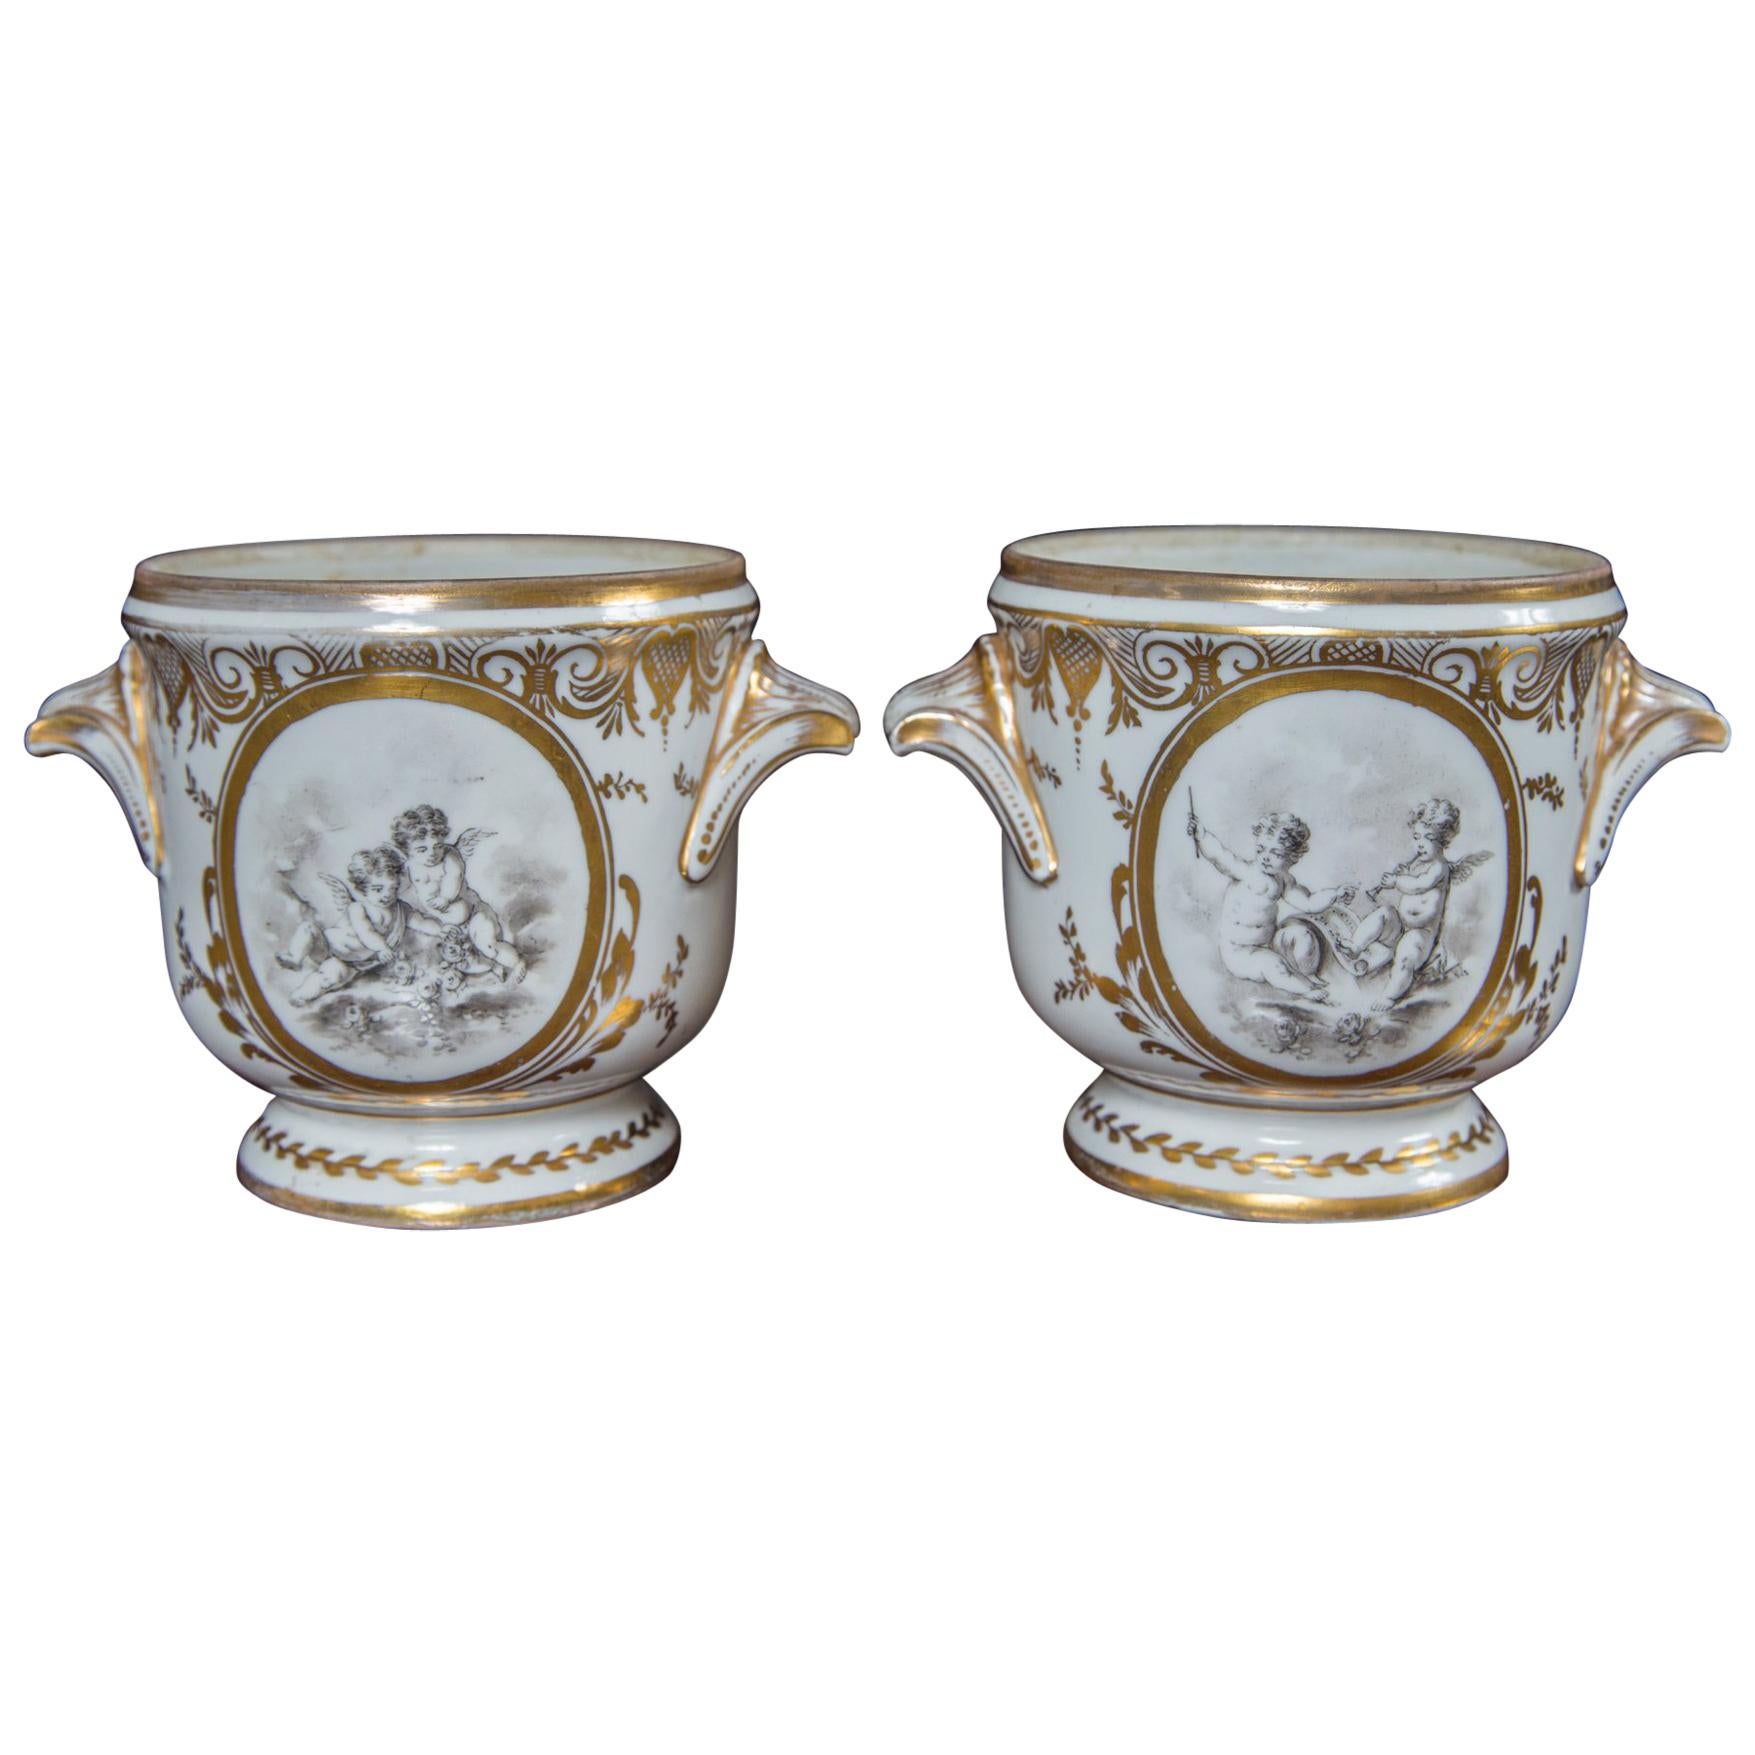 Pair of Decorated White French Porcelain Cache Pots